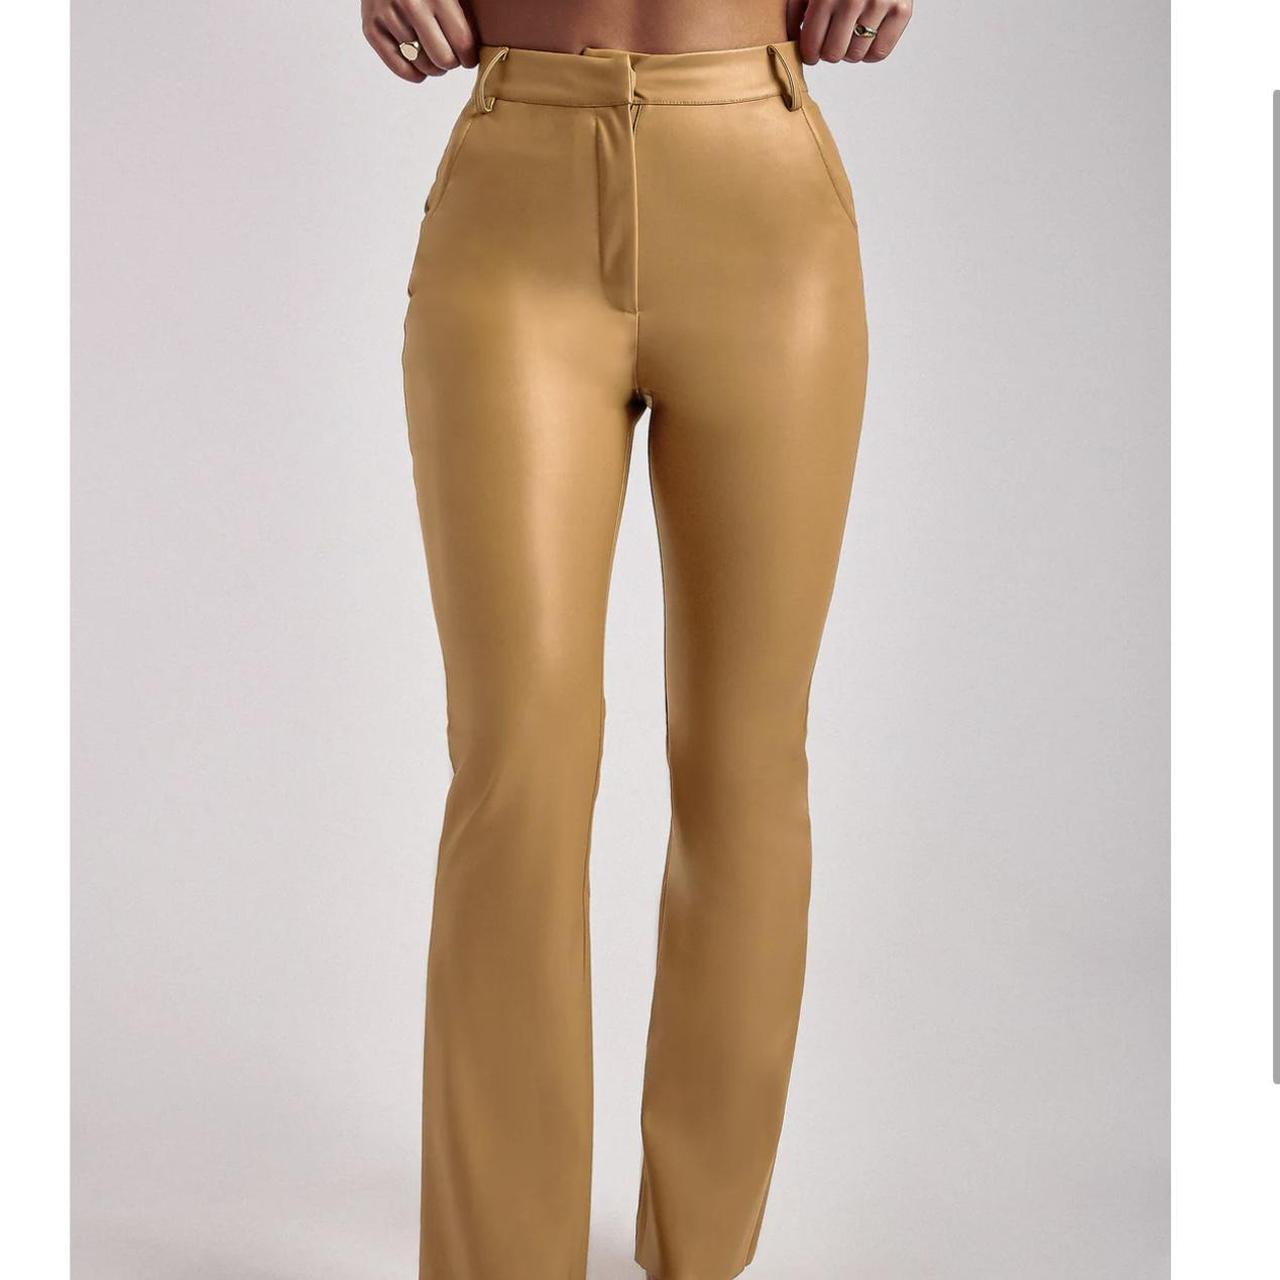 Cream Faux Leather Pocket Detail Straight Pant